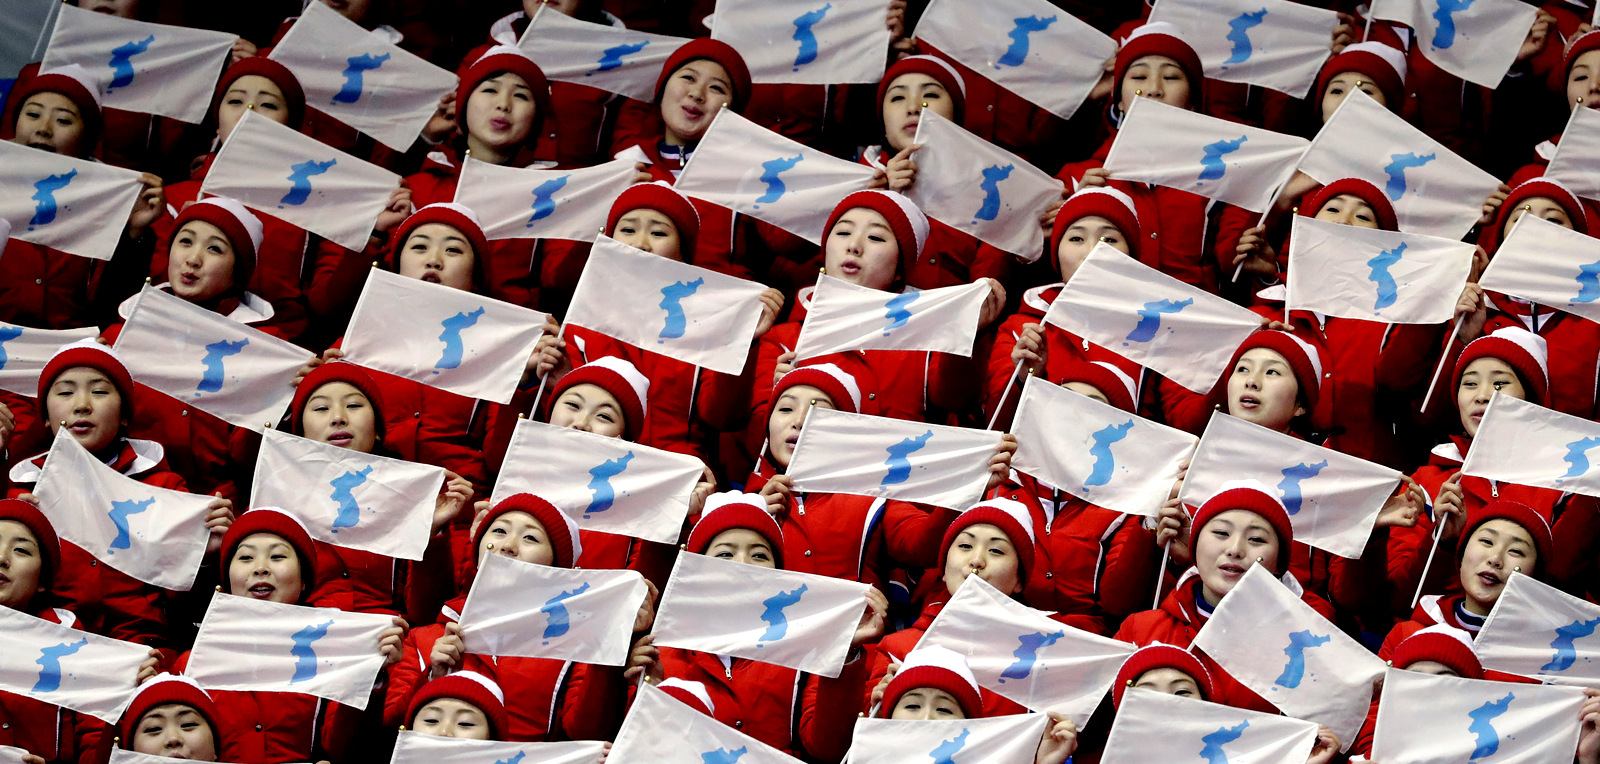 North Korea supporters wave the Korean unification flag ahead of the pairs free skate figure skating final in the Gangneung Ice Arena at the 2018 Winter Olympics in Gangneung, South Korea, Feb. 15, 2018. (AP/Bernat Armangue)